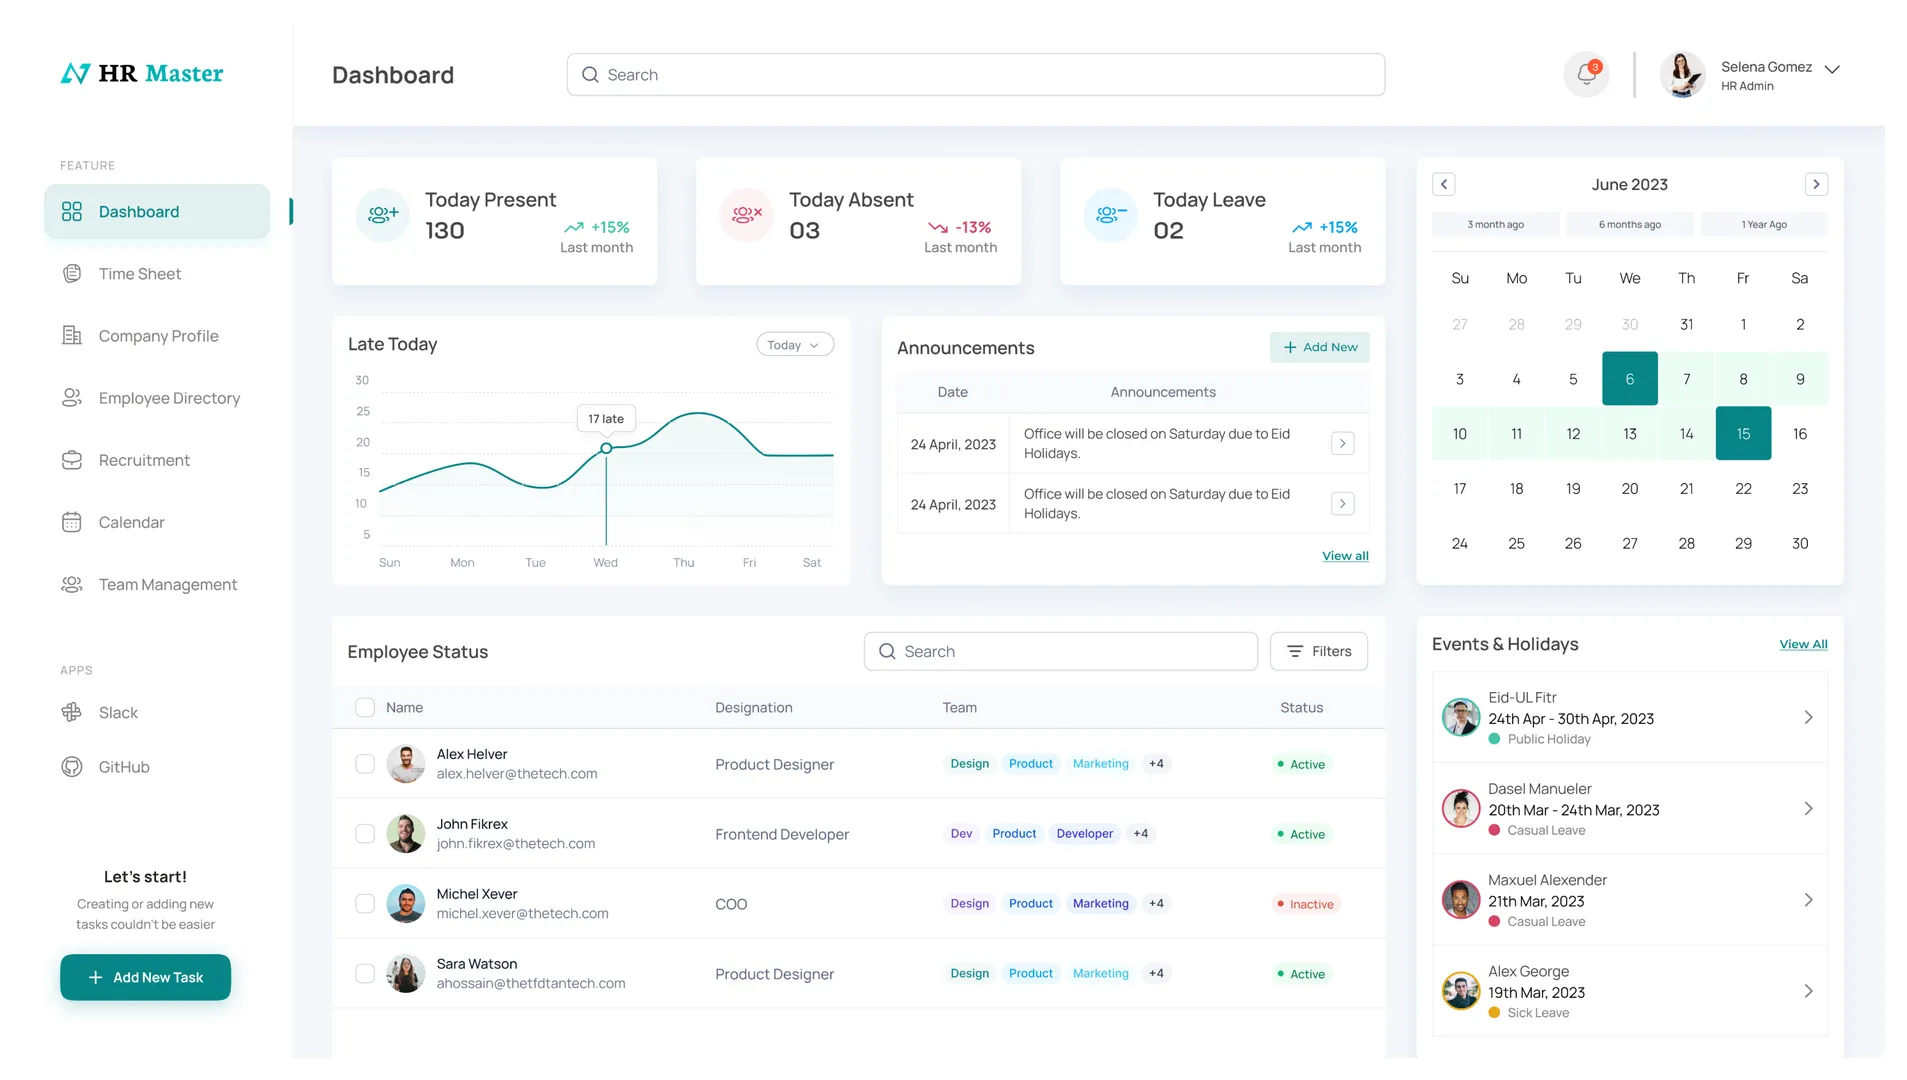 Hello There! 👋
Are you having trouble managing your employees and your company?

Take a look at our vision for the new design concept for the HR Management Dashboard called HR Master! 🤩